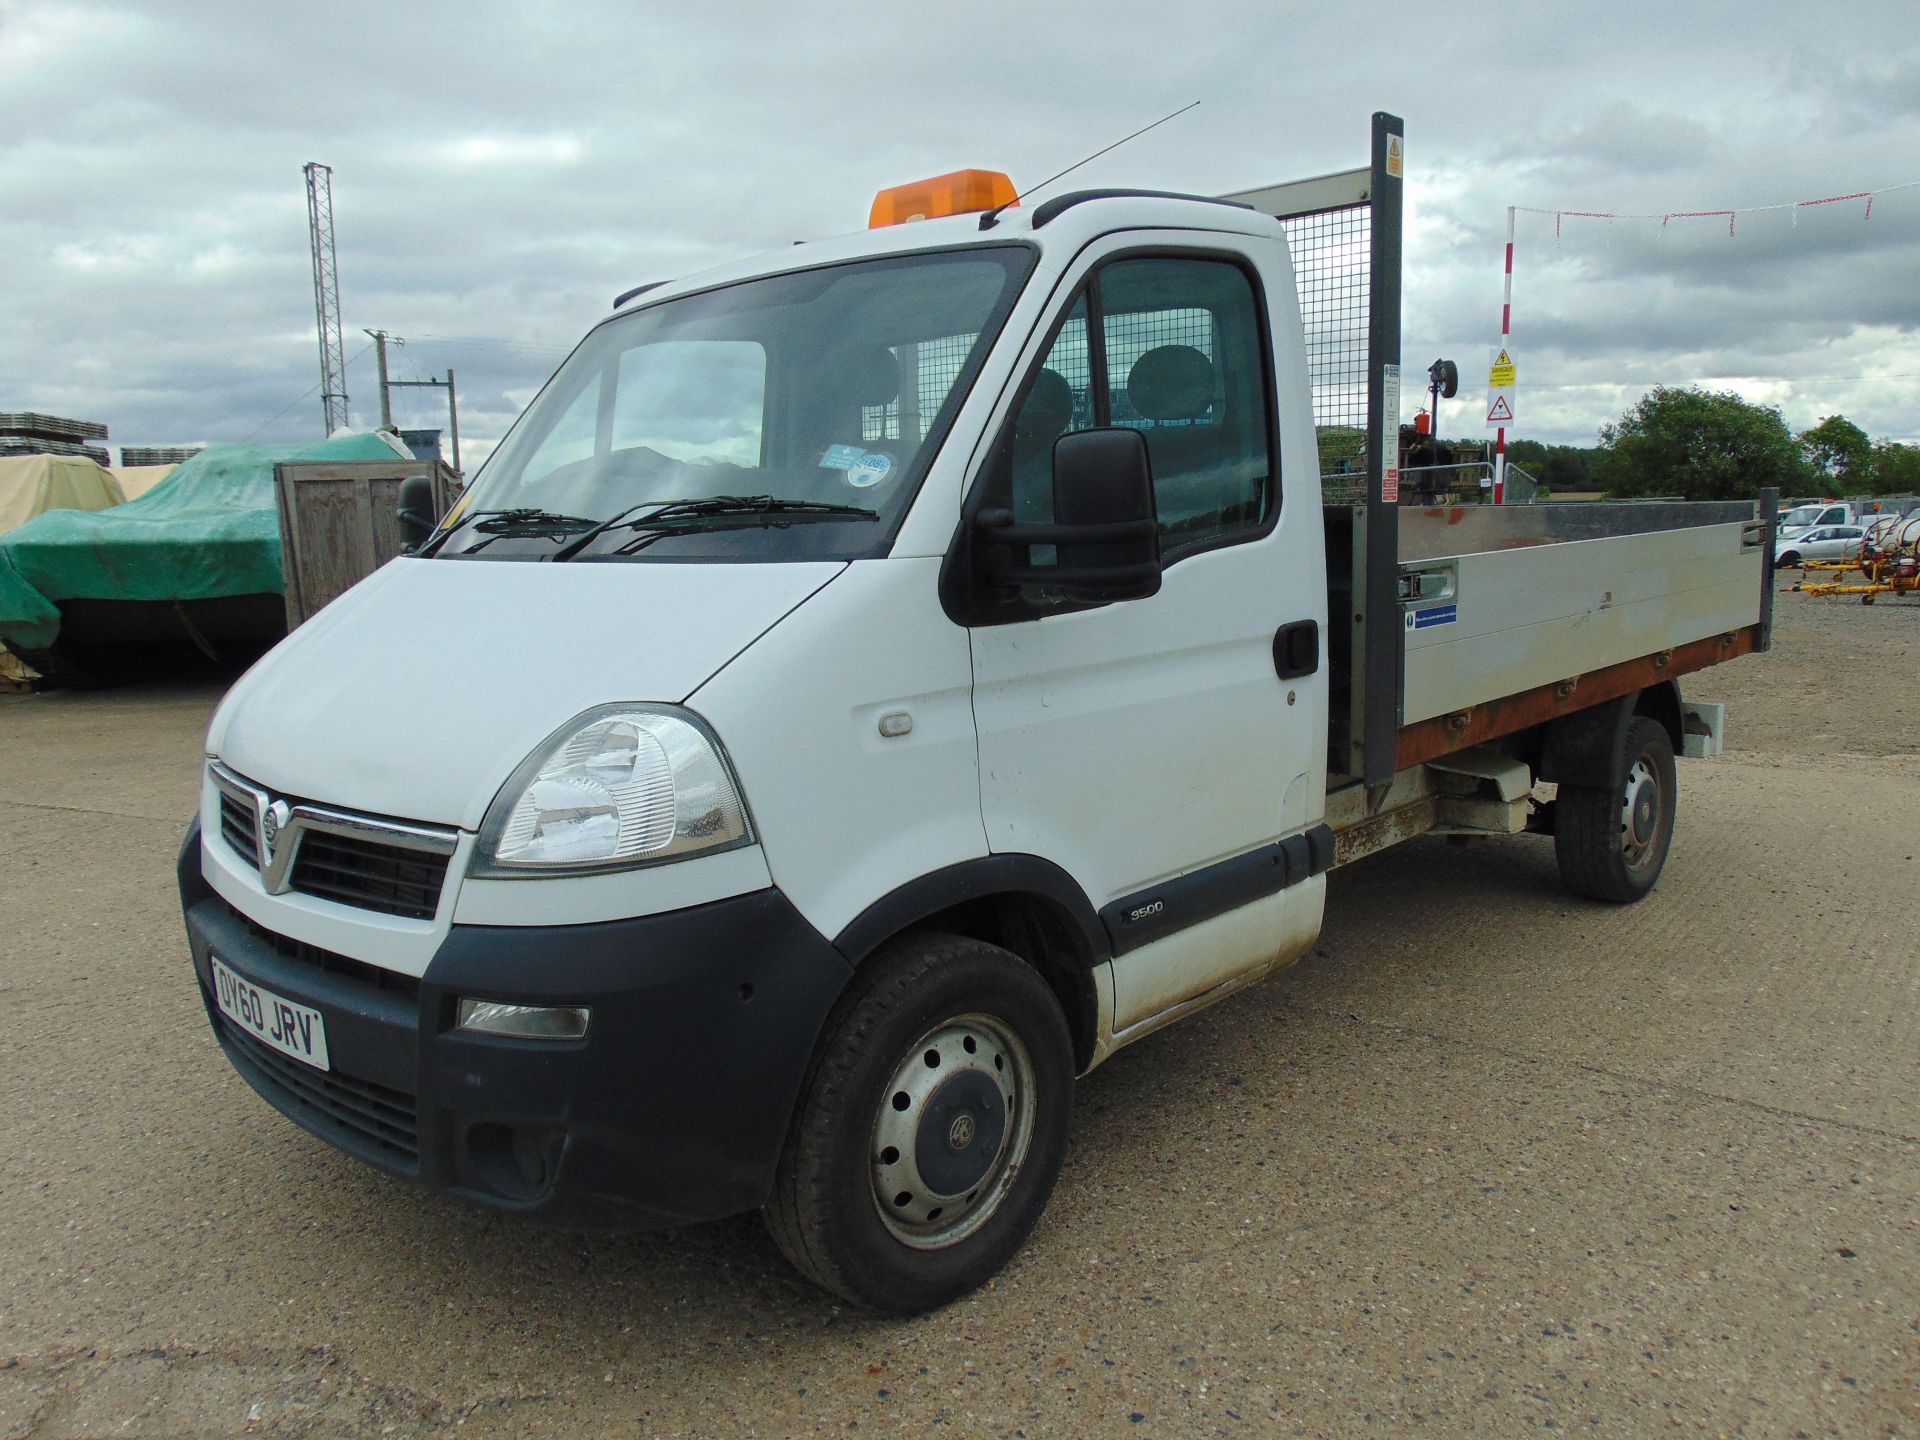 2010 Vauxhall Movano 3500 2.5 CDTi MWB Flat Bed Tipper - Image 3 of 14